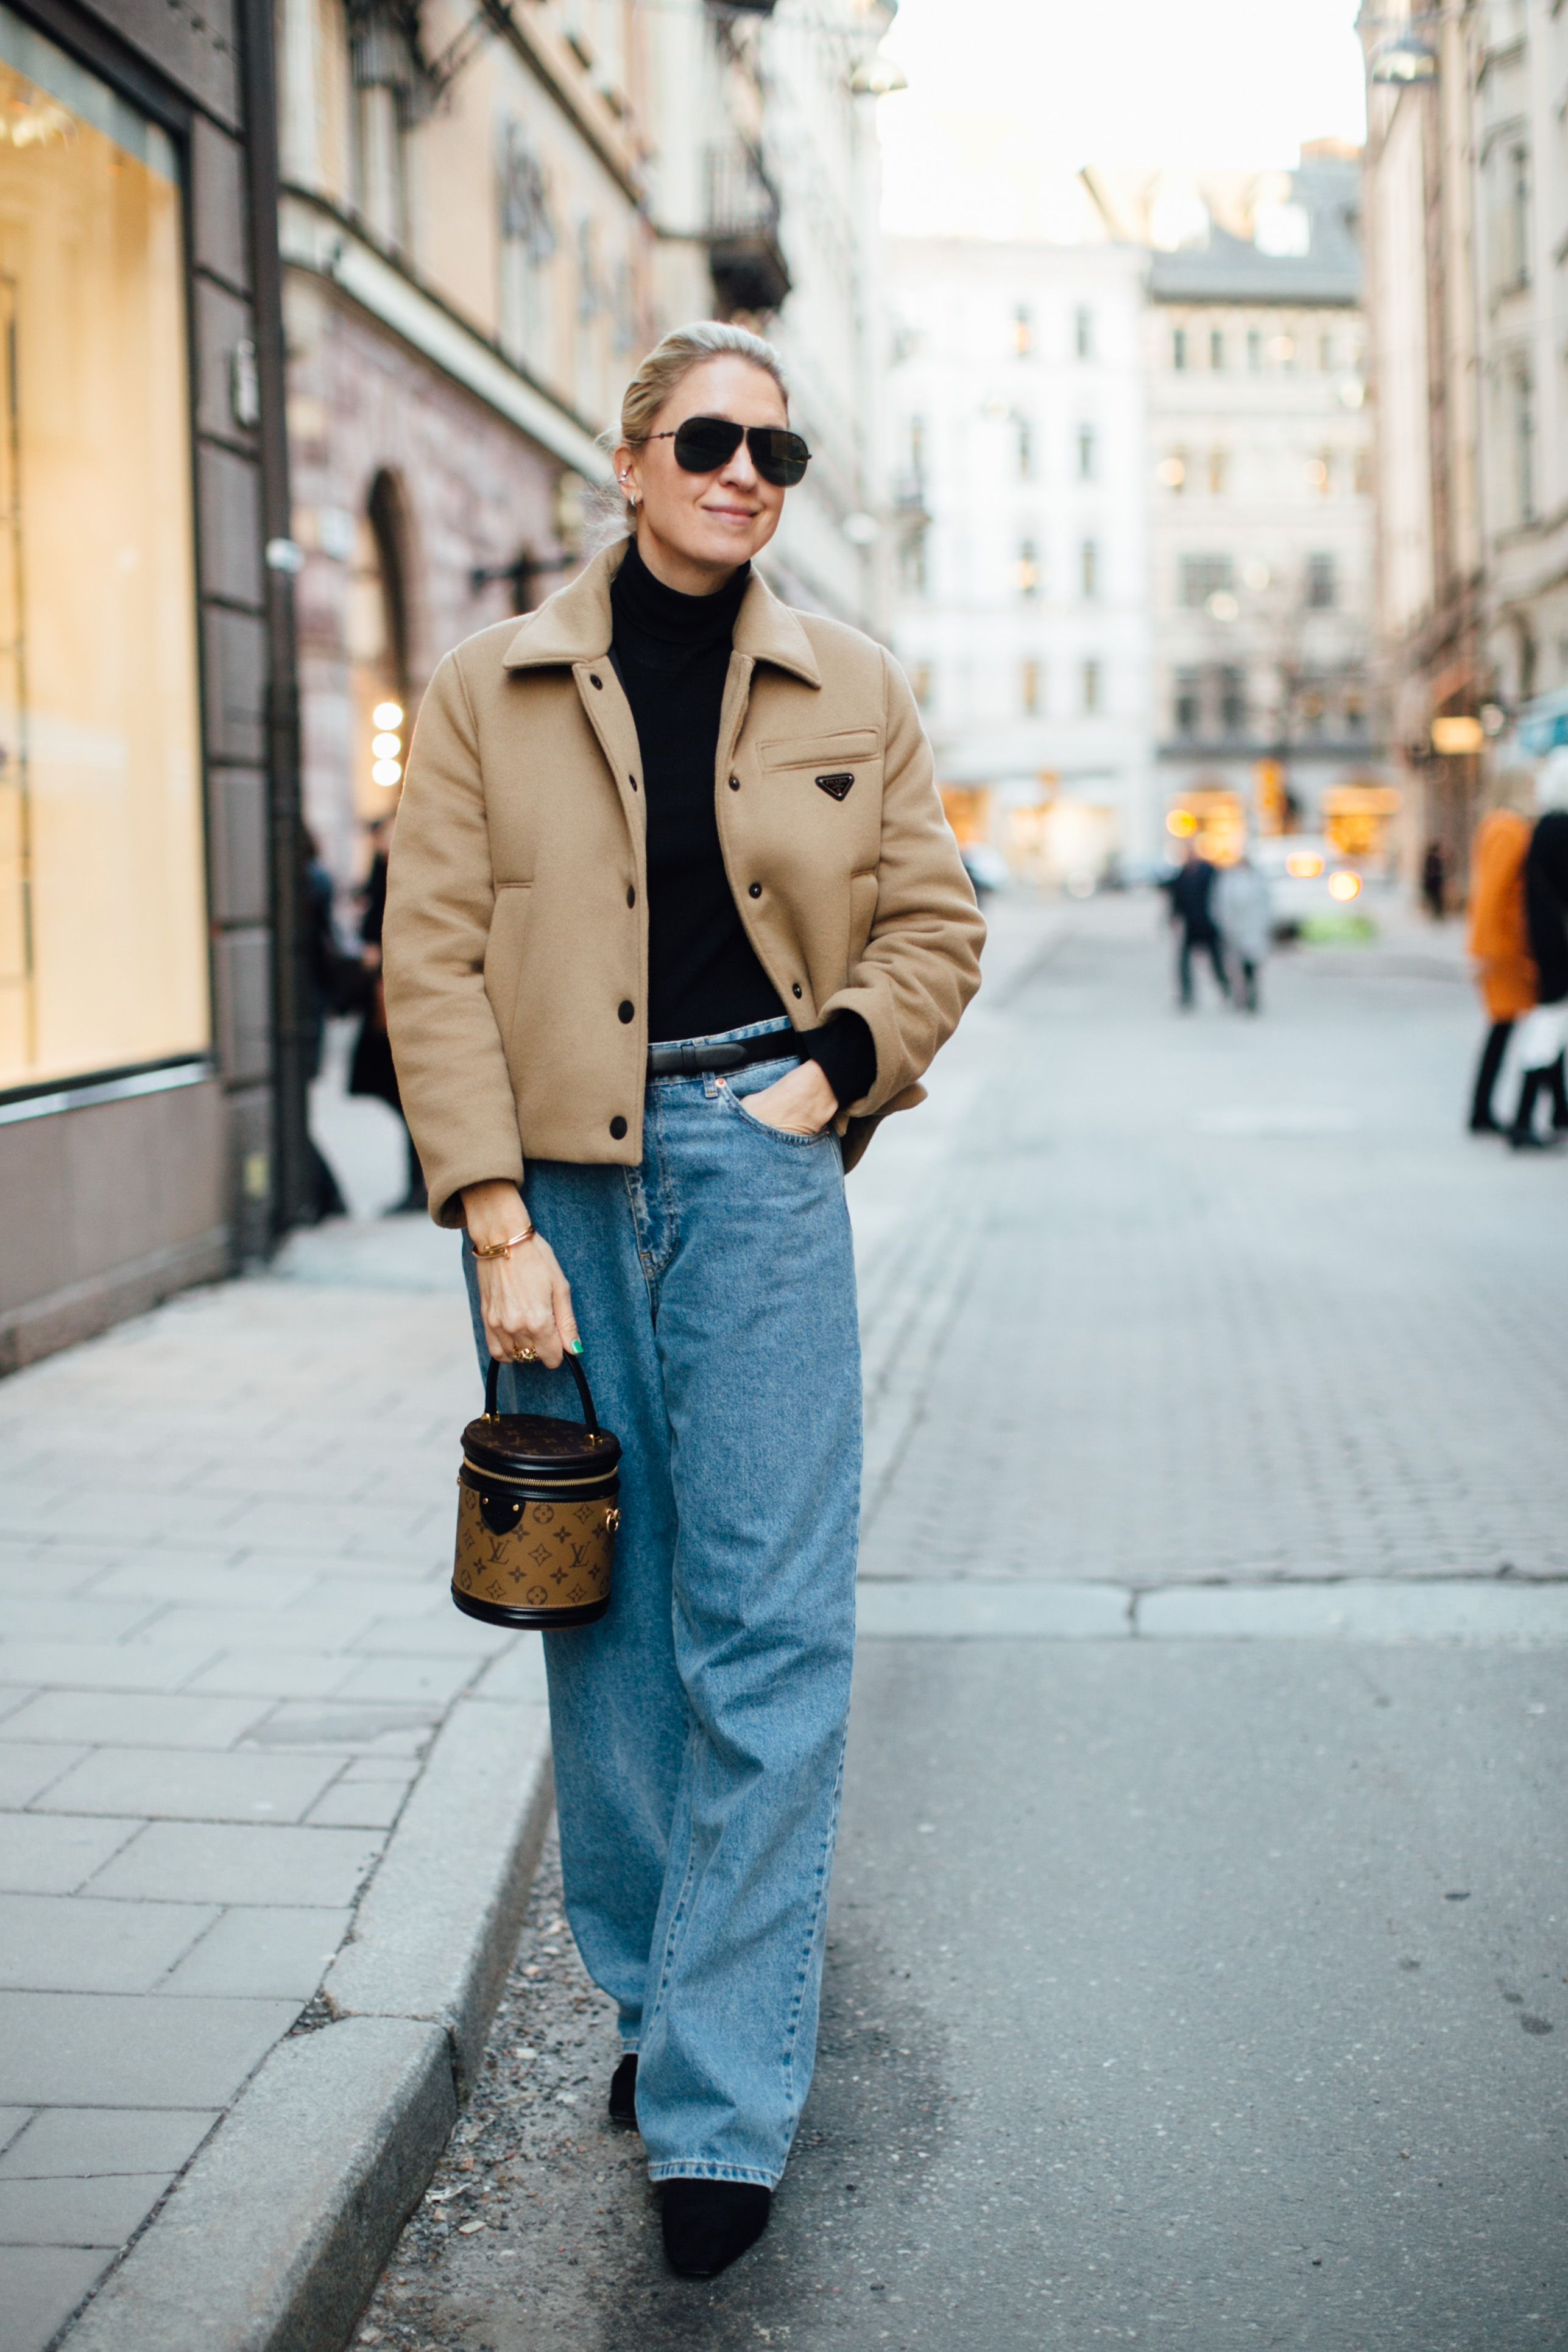 How To Find Your Personal Style  12 Best Fashion Tips